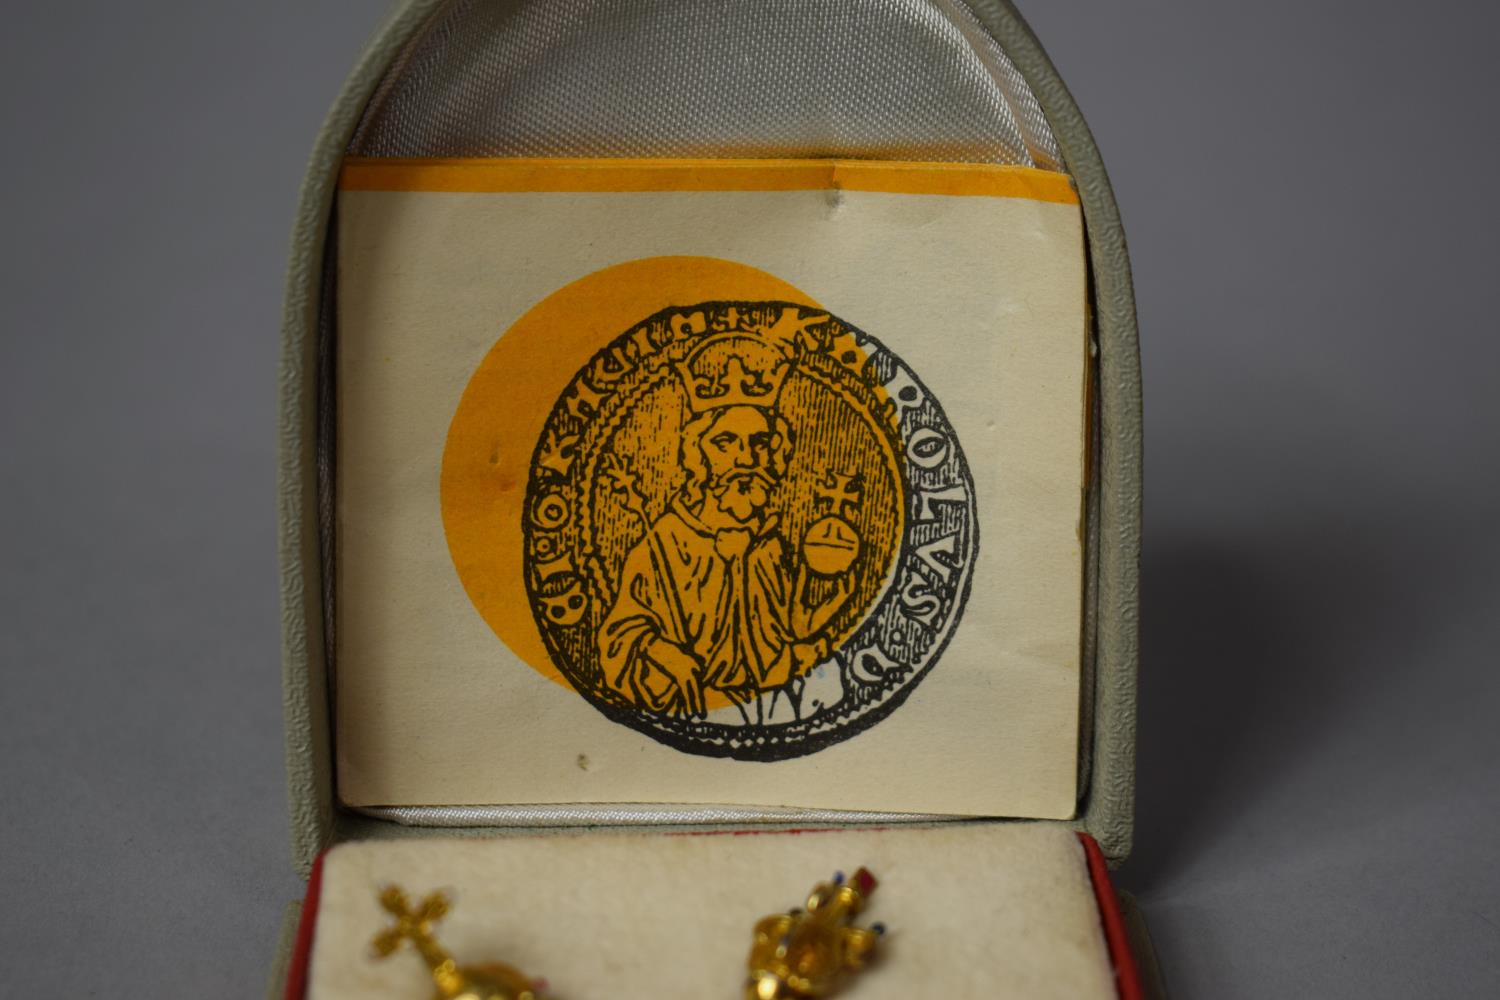 A Boxed Silver Replica of the Crown Jewels of Czechoslovakia by Soluna, c.1960 - Image 2 of 4